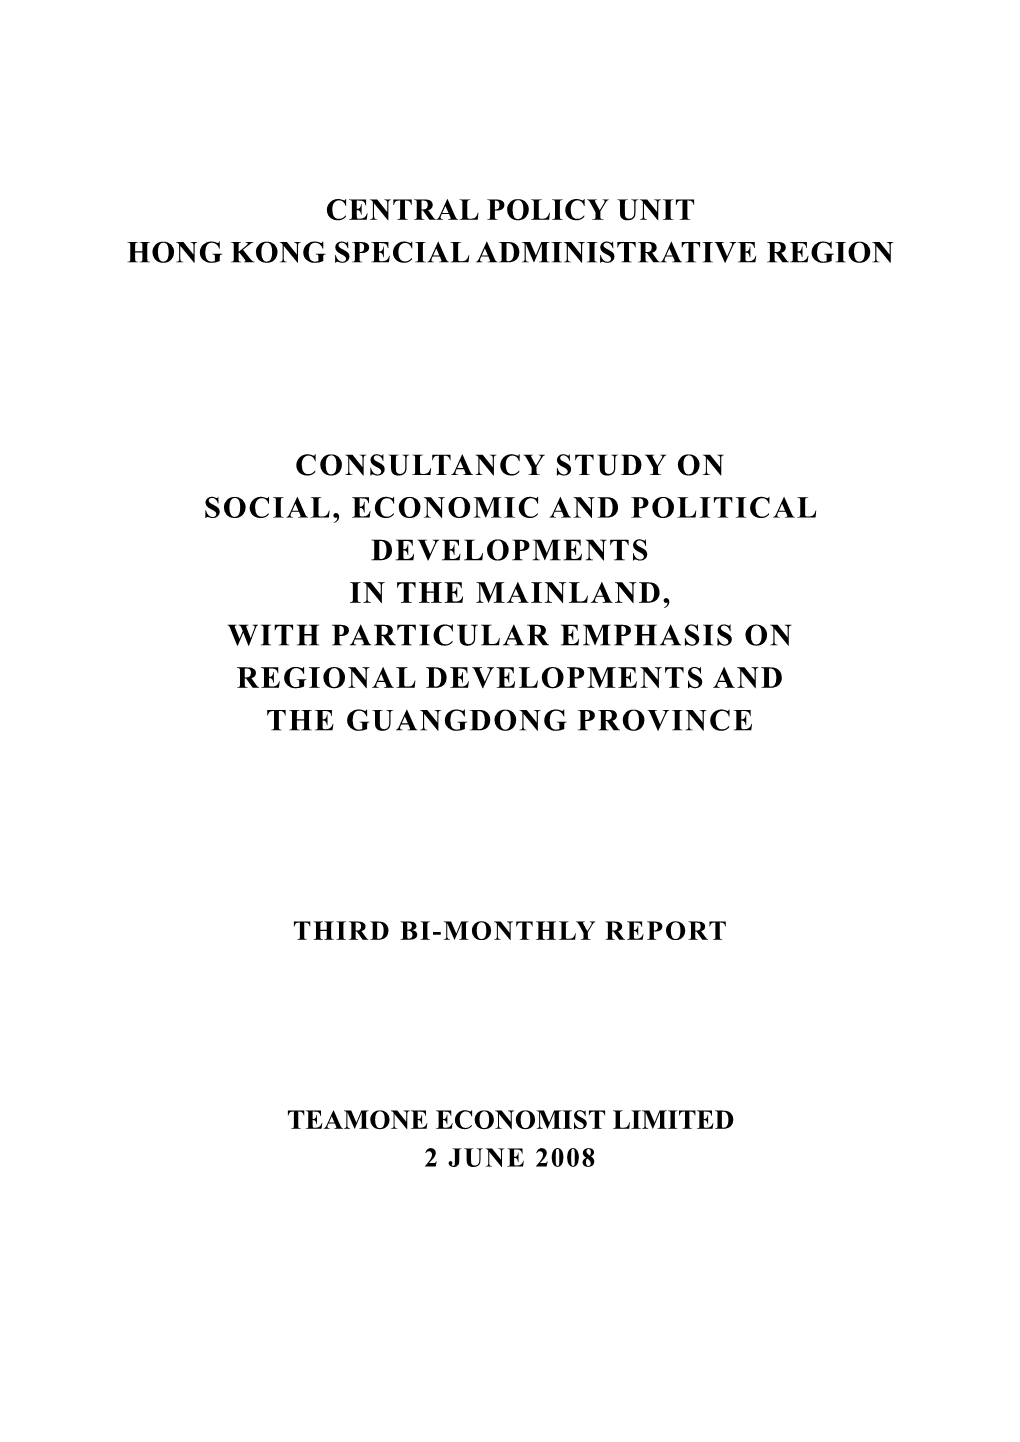 Central Policy Unit Hong Kong Special Administrative Region Consultancy Study on Social, Economic and Political Developments I